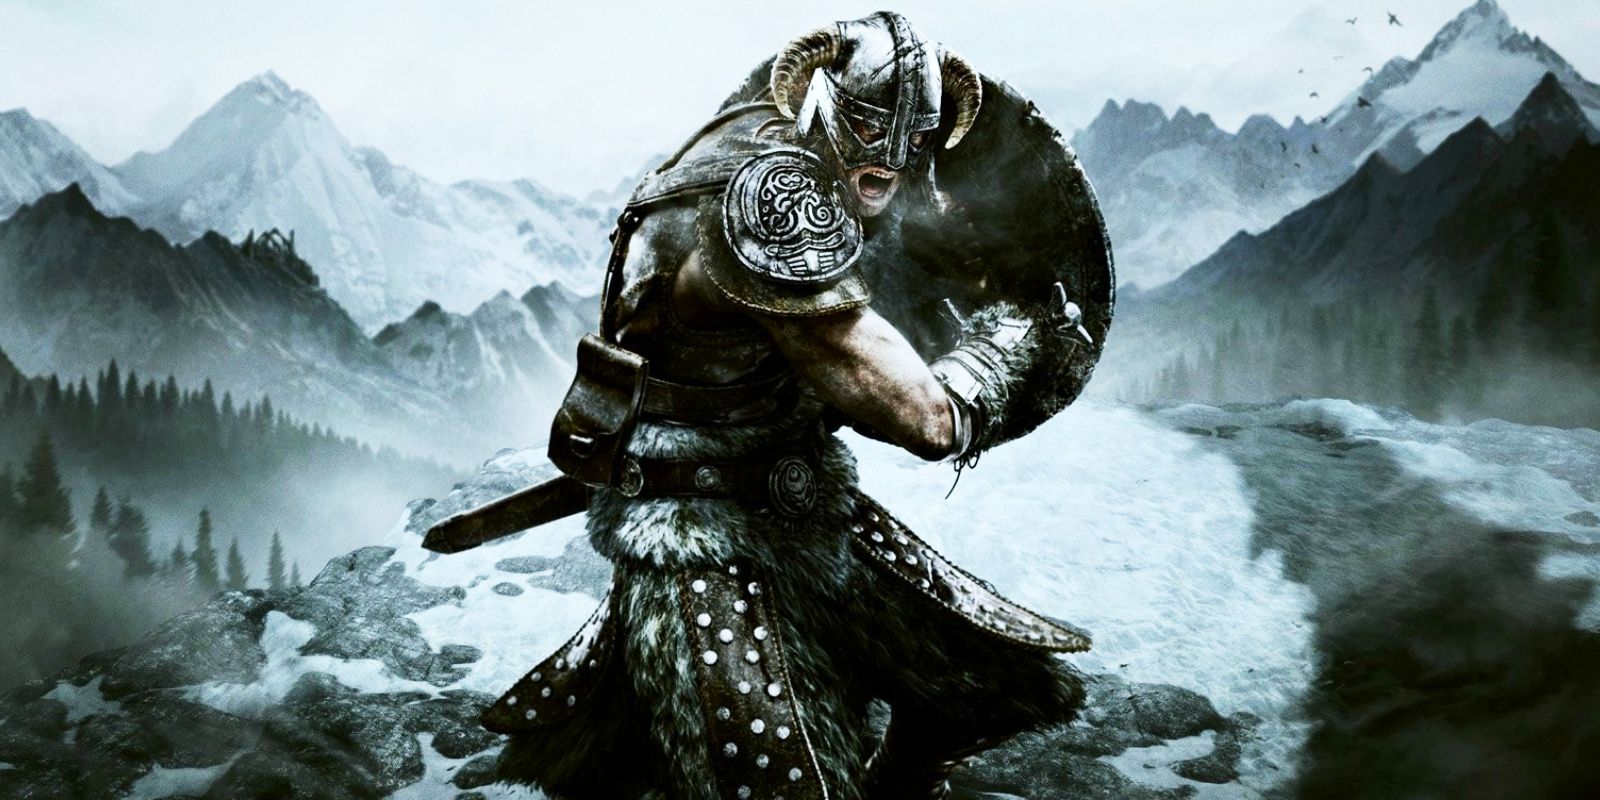 It's unclear how exactly the player character became Dragonborn in Skyrim 